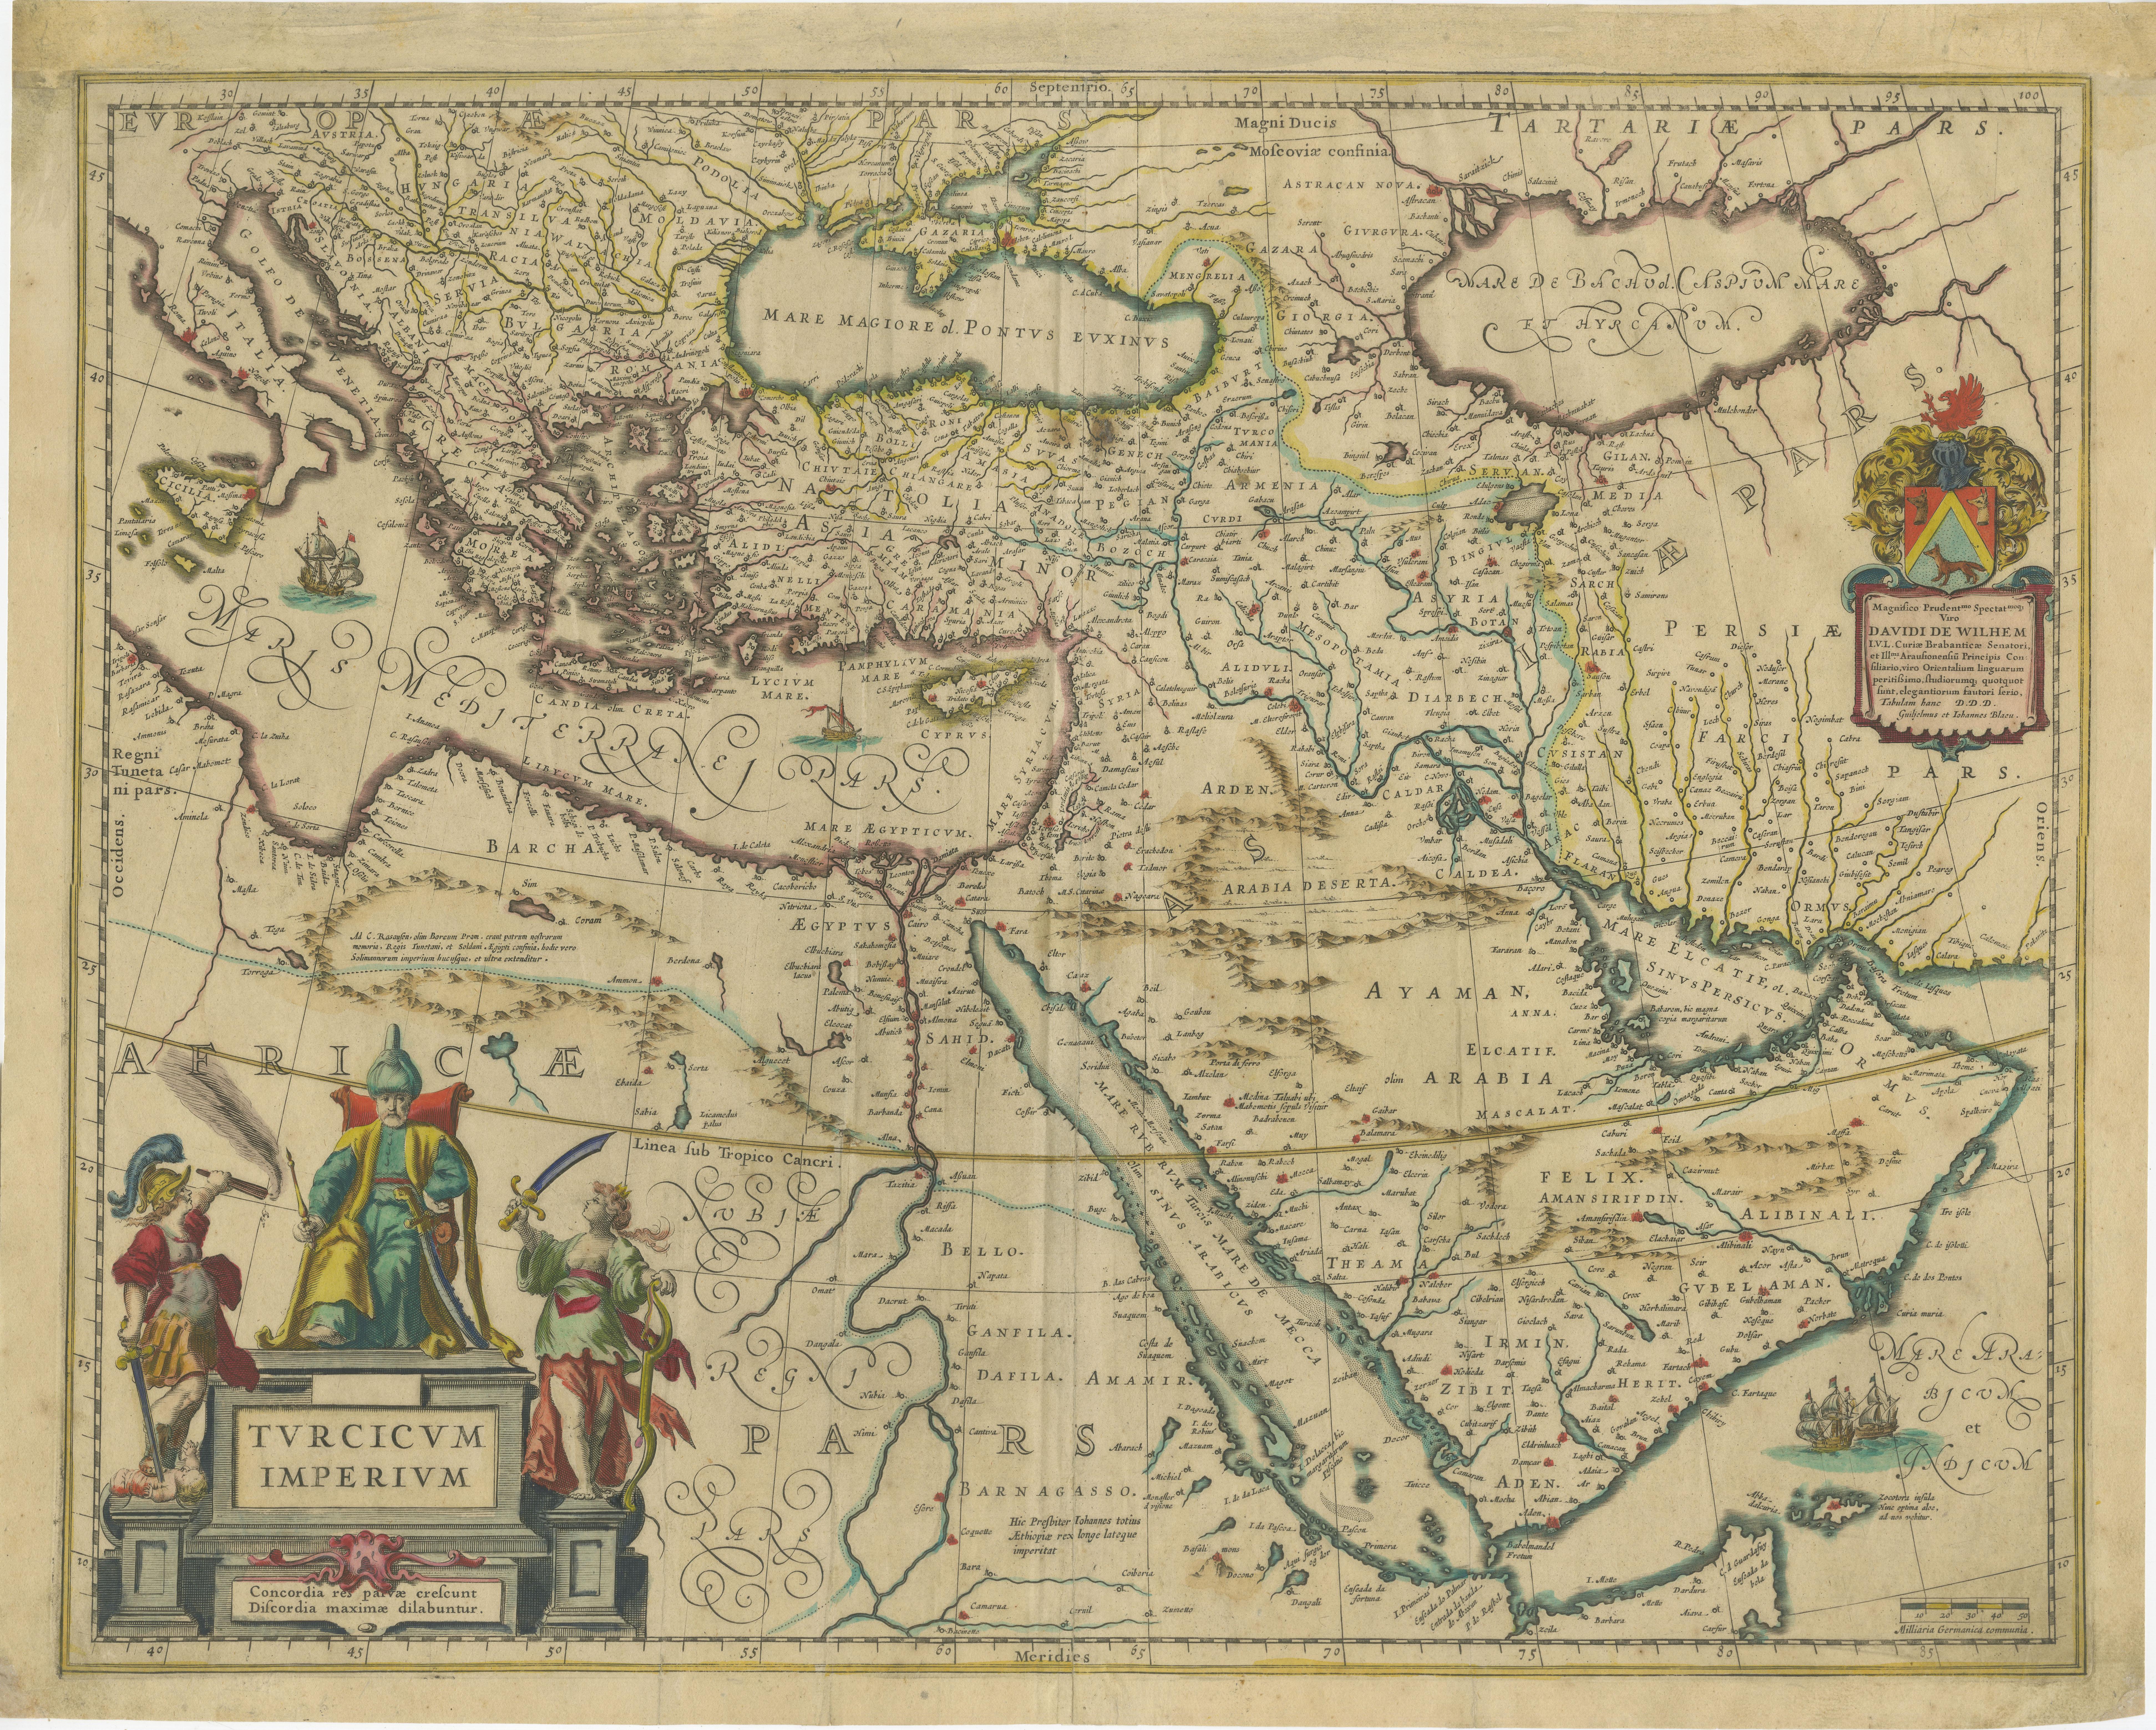 The antique map titled 'Turcicum Imperium' is an original old map of the Ottoman Empire, historically and colloquially known as the Turkish Empire. Here are the key features and details of the map:

1. **Geographic Coverage**:
   - The map covers a